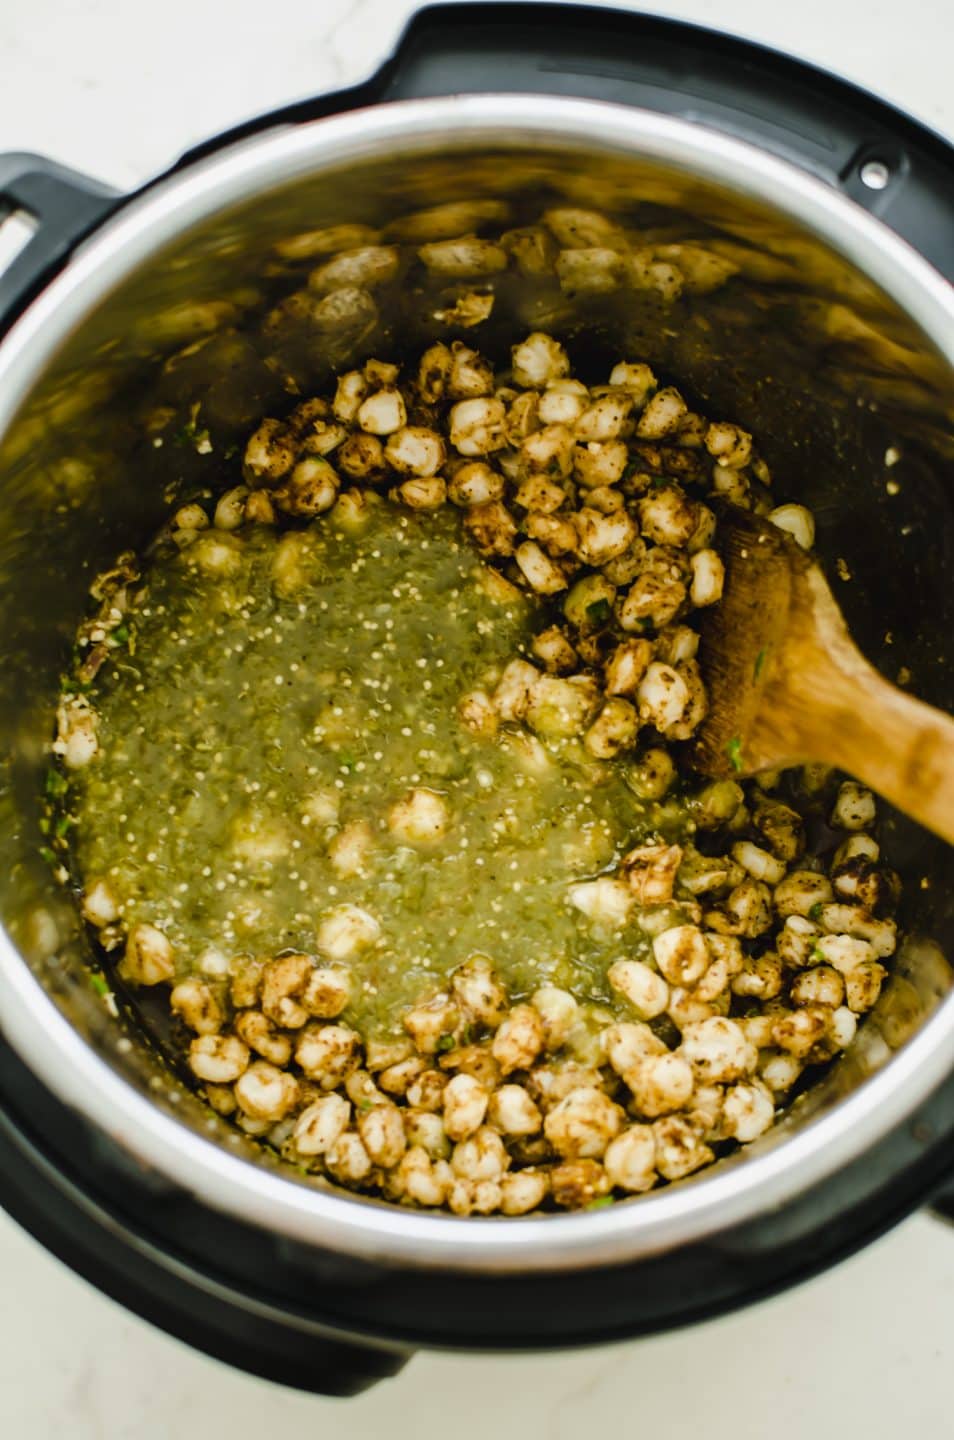 An Instant Pot filled with hominy and green salsa verde.